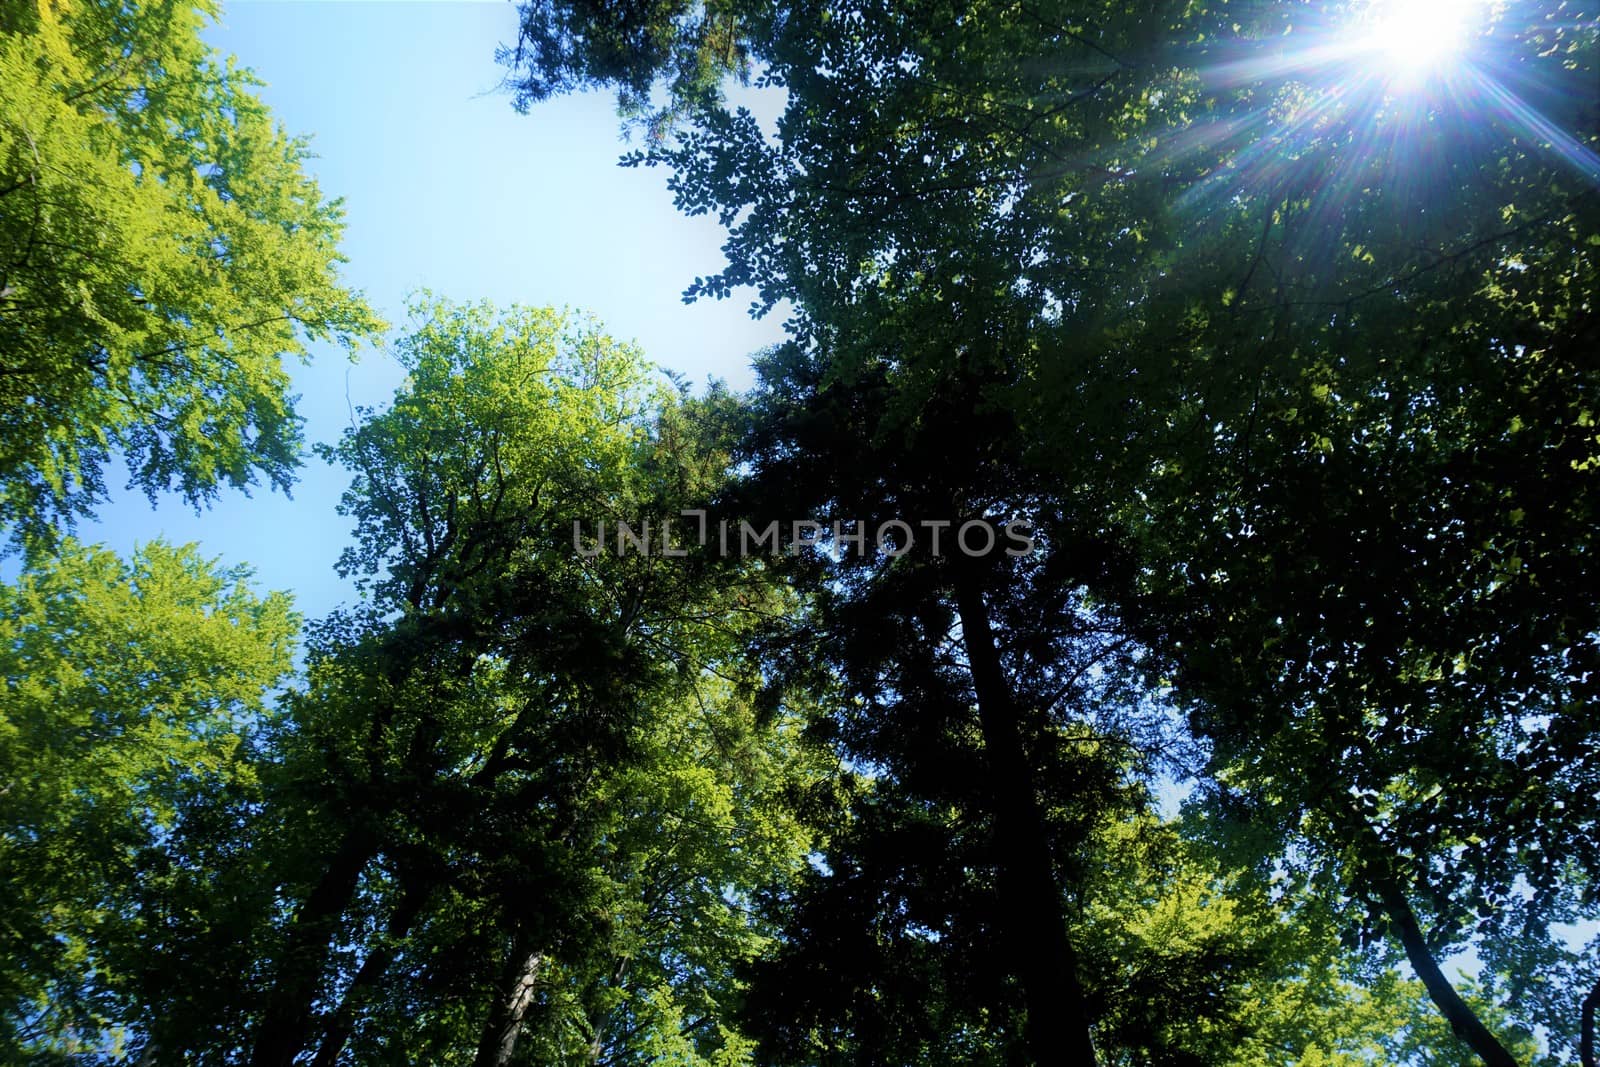 The sun shining in the forest over Baza 20 in Kocevski rog by pisces2386